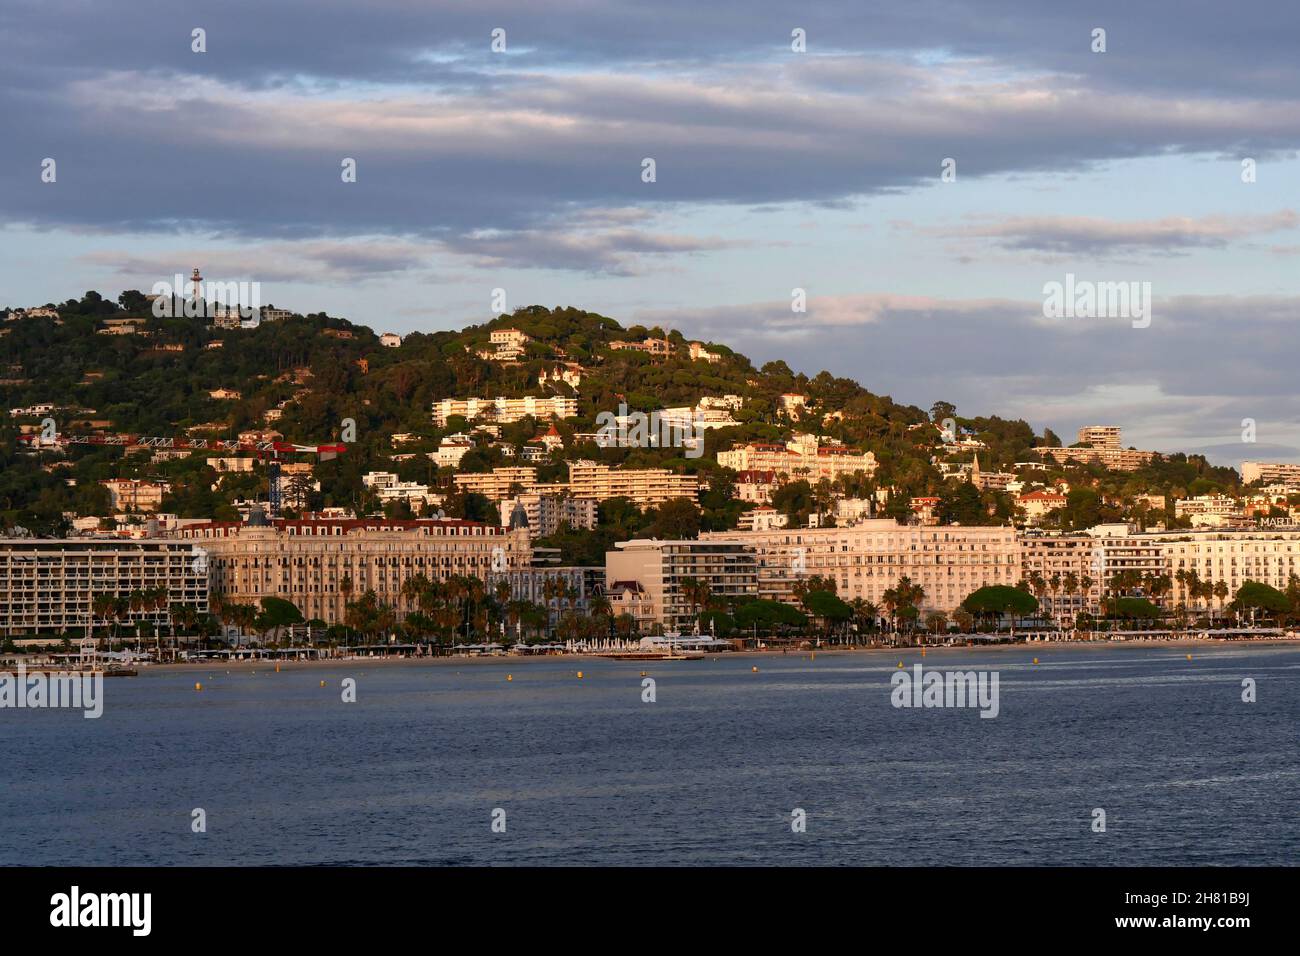 Carlton Intercontinental Hotel on the Cannes seafront, Alpes-Maritimes ...